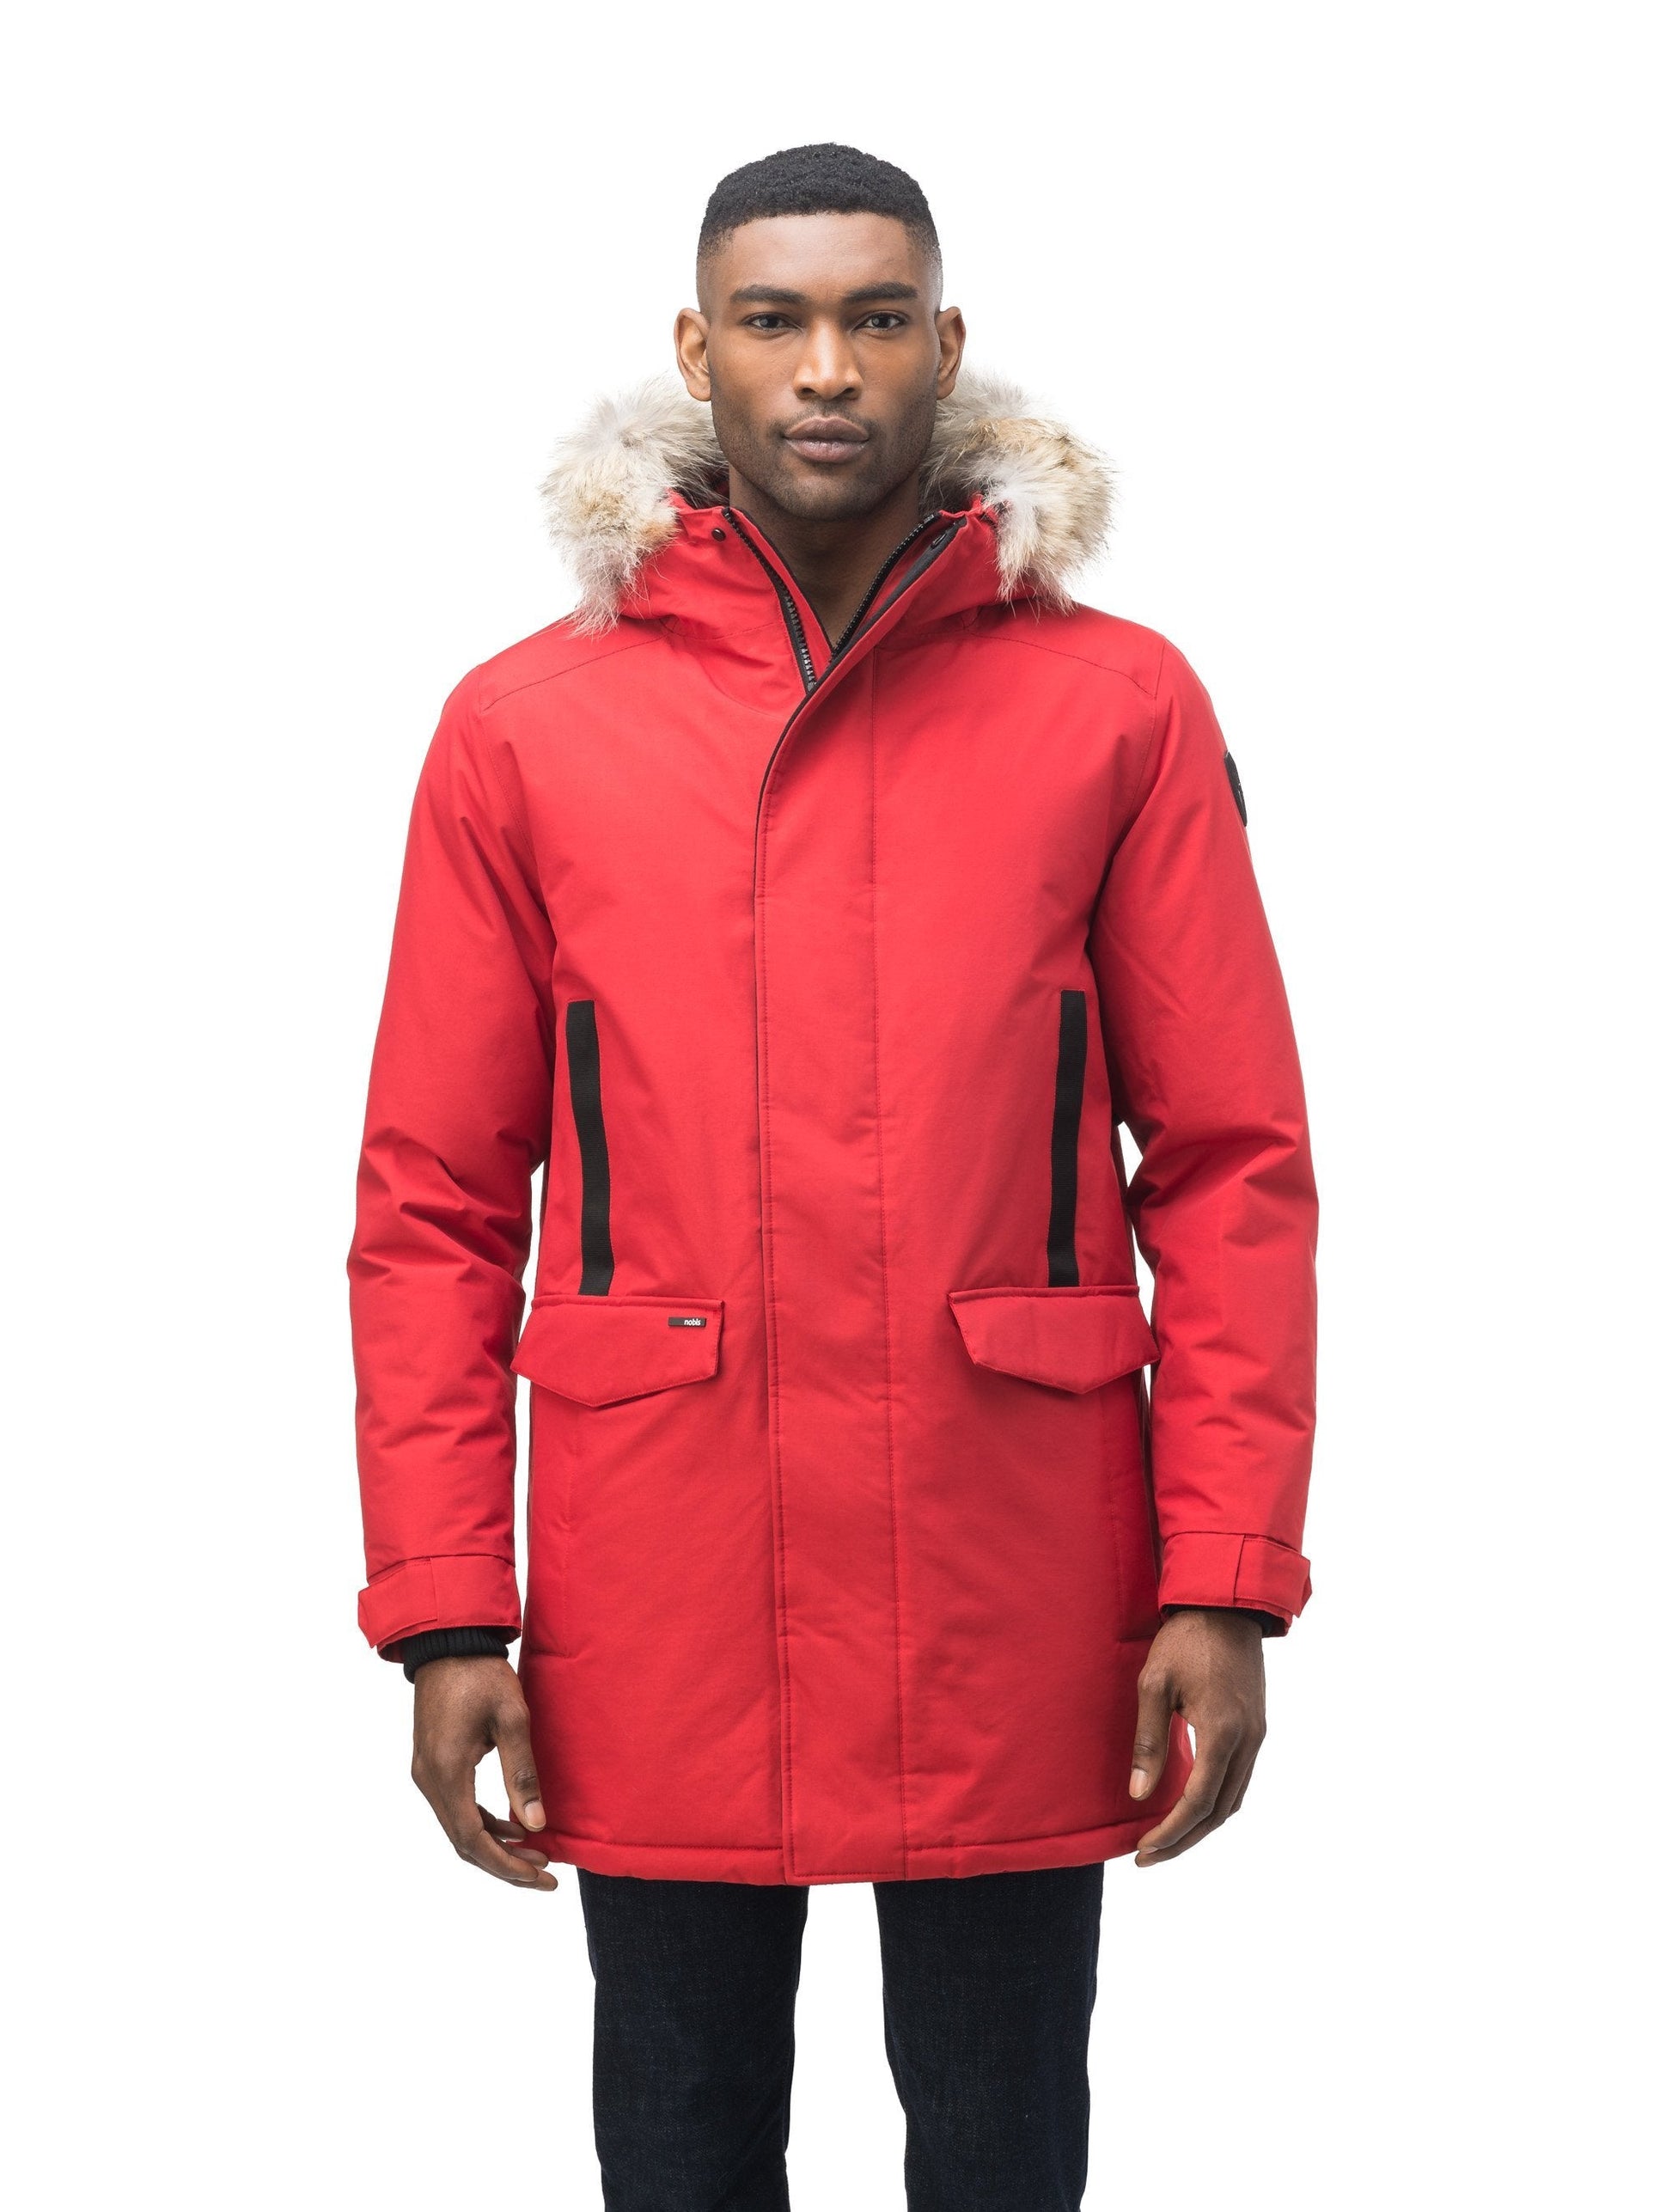 Lightweight men's parka with duck down fill and removable fur trim around the hood in Vermillion